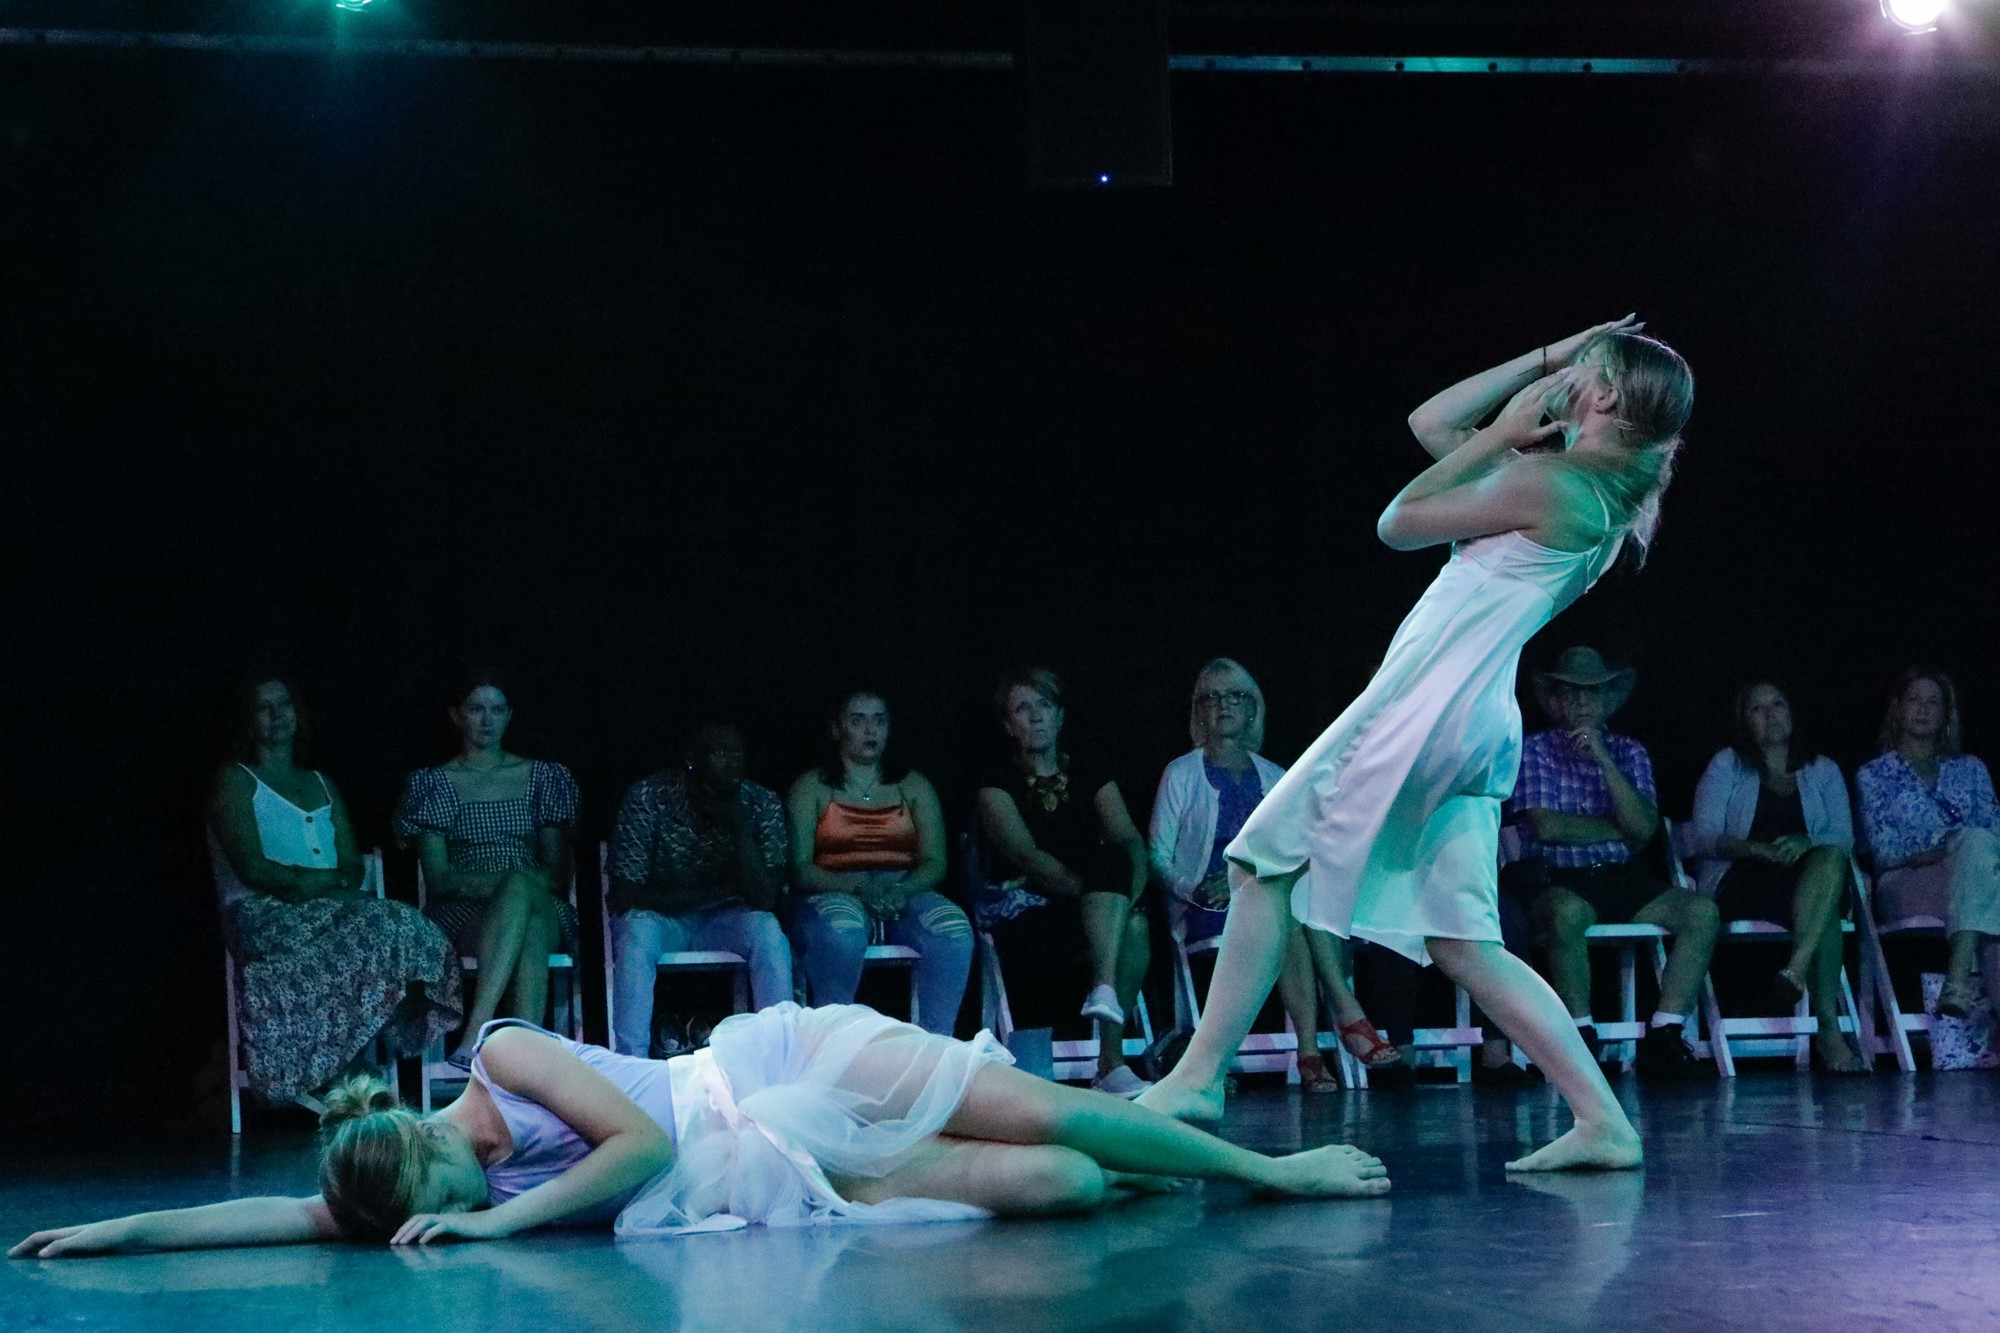 The work of rising choreographers will be on display at the May In the Round performance for Sarasota Contemporary Dance. (Courtesy photo: Sorcha Augustine)